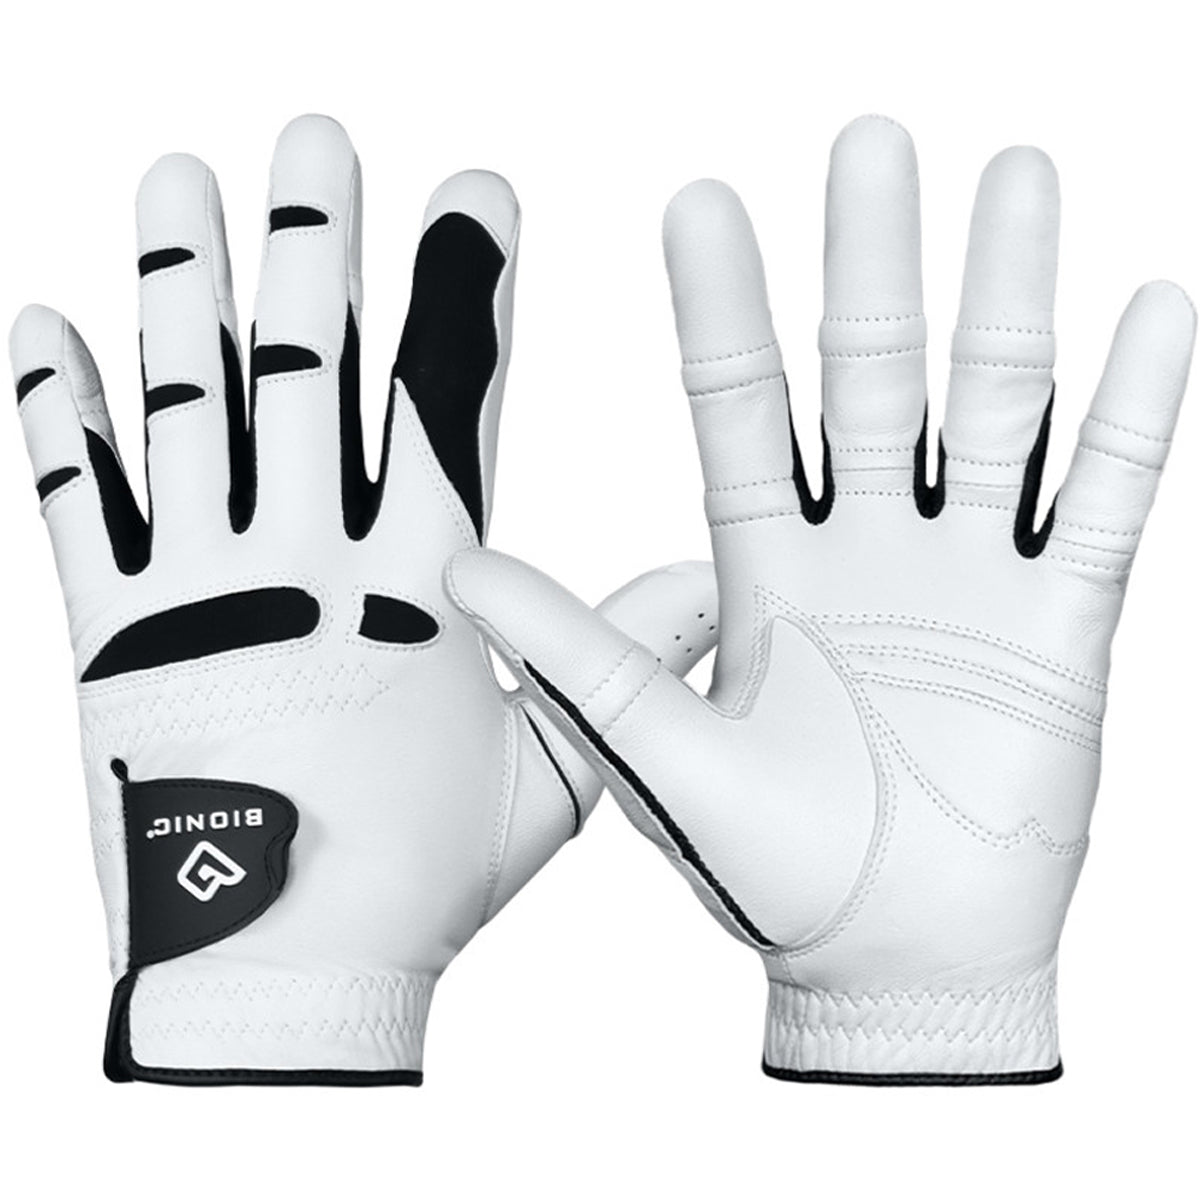 Bionic Men's Right Hand Stable Grip 2.0 Dual Expansion Zone Golf Glove - White Bionic